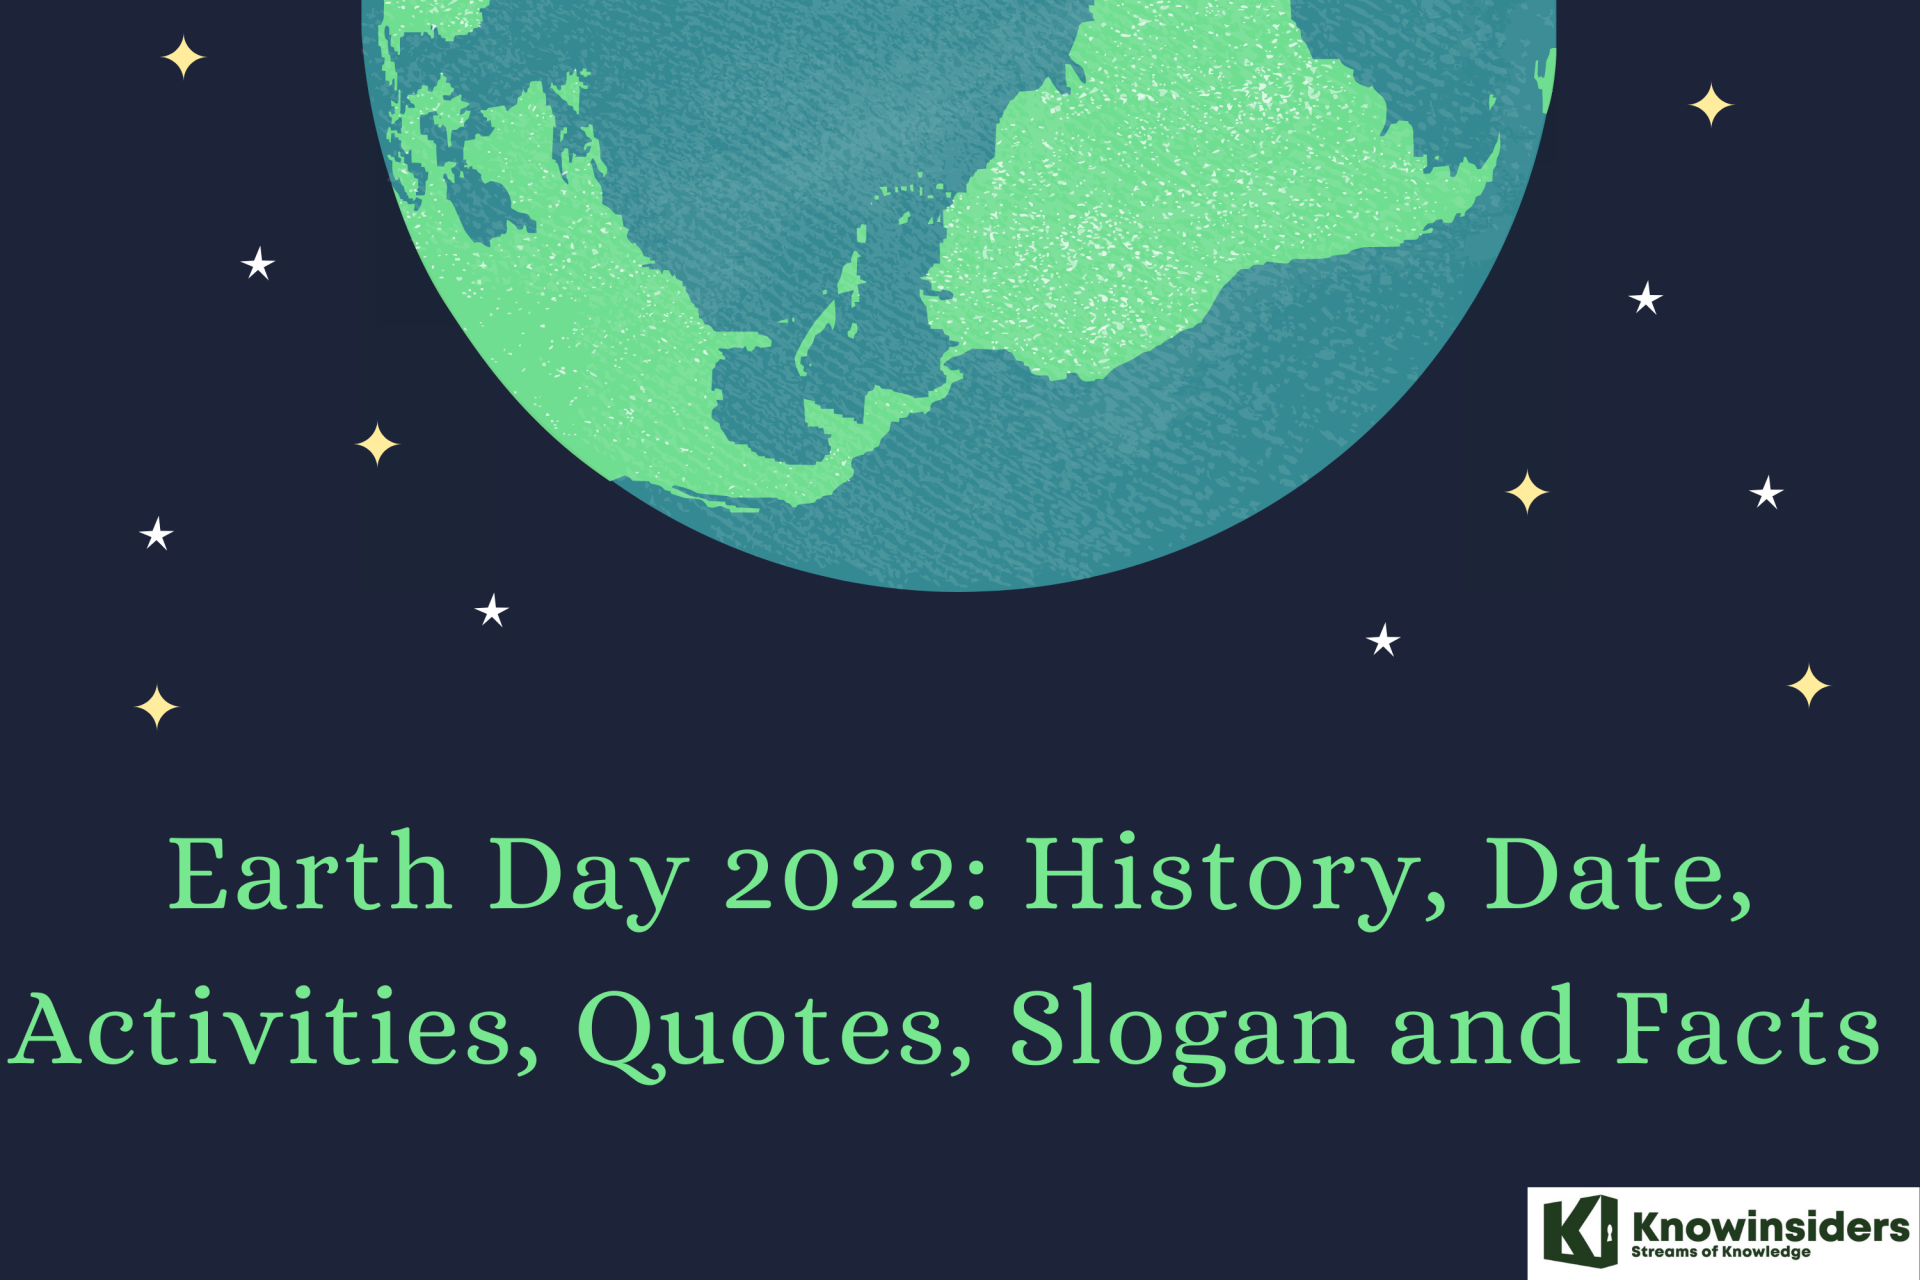 Earth Day 2022: History, Date, Activities, Quotes, Slogan and Facts 